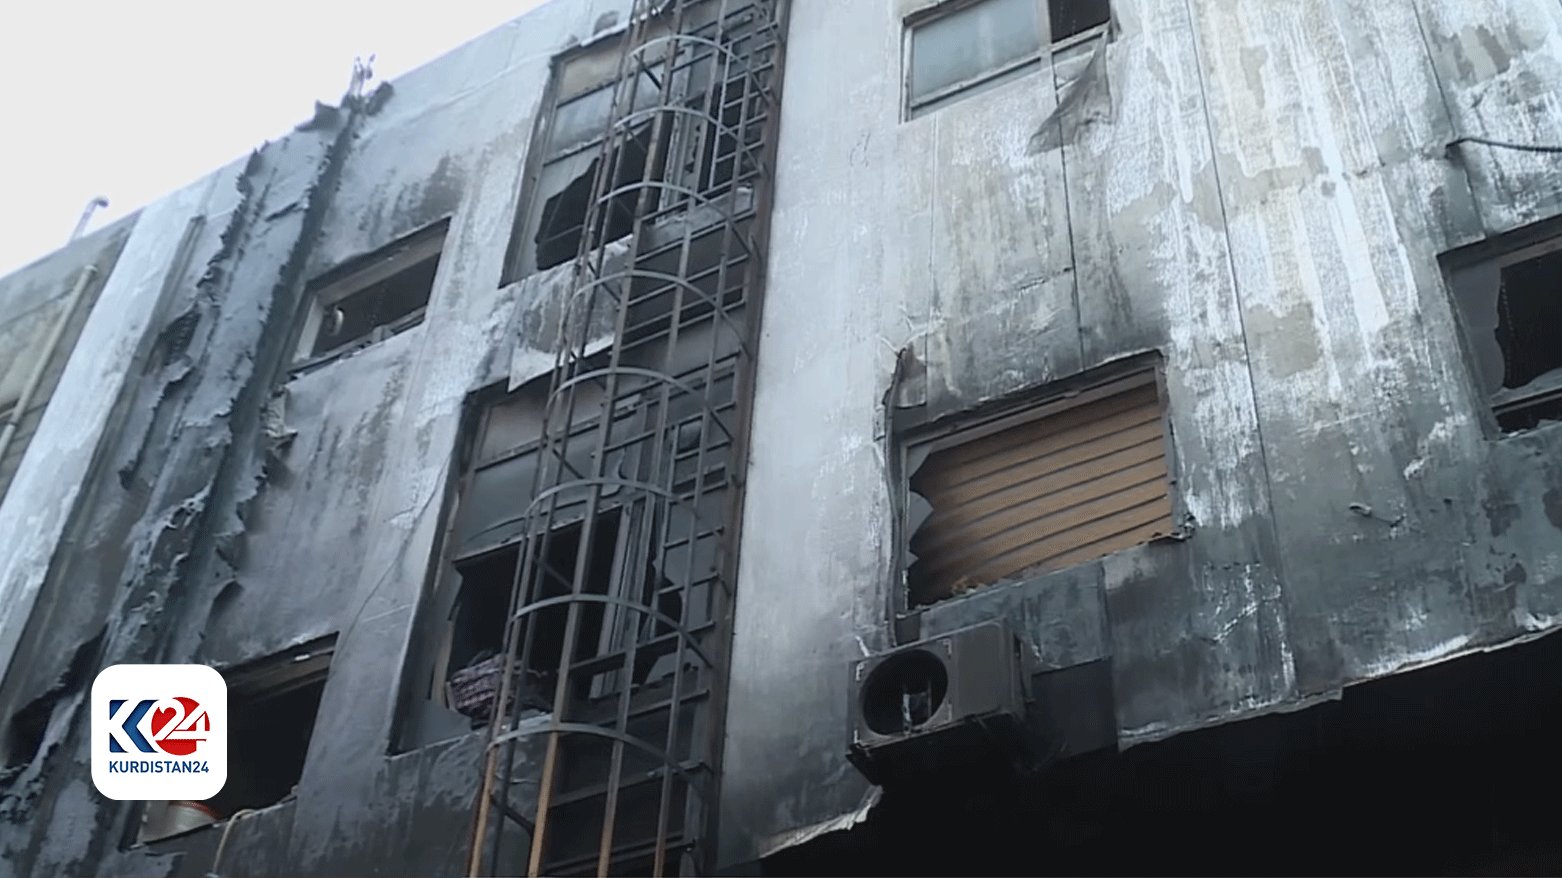 The exterior of burned down facade of the residential building, in which at least 14 were killed on Friday night, Dec. 9, 2023. (Photo: Rahand Mohammad/Kurdistan 24)